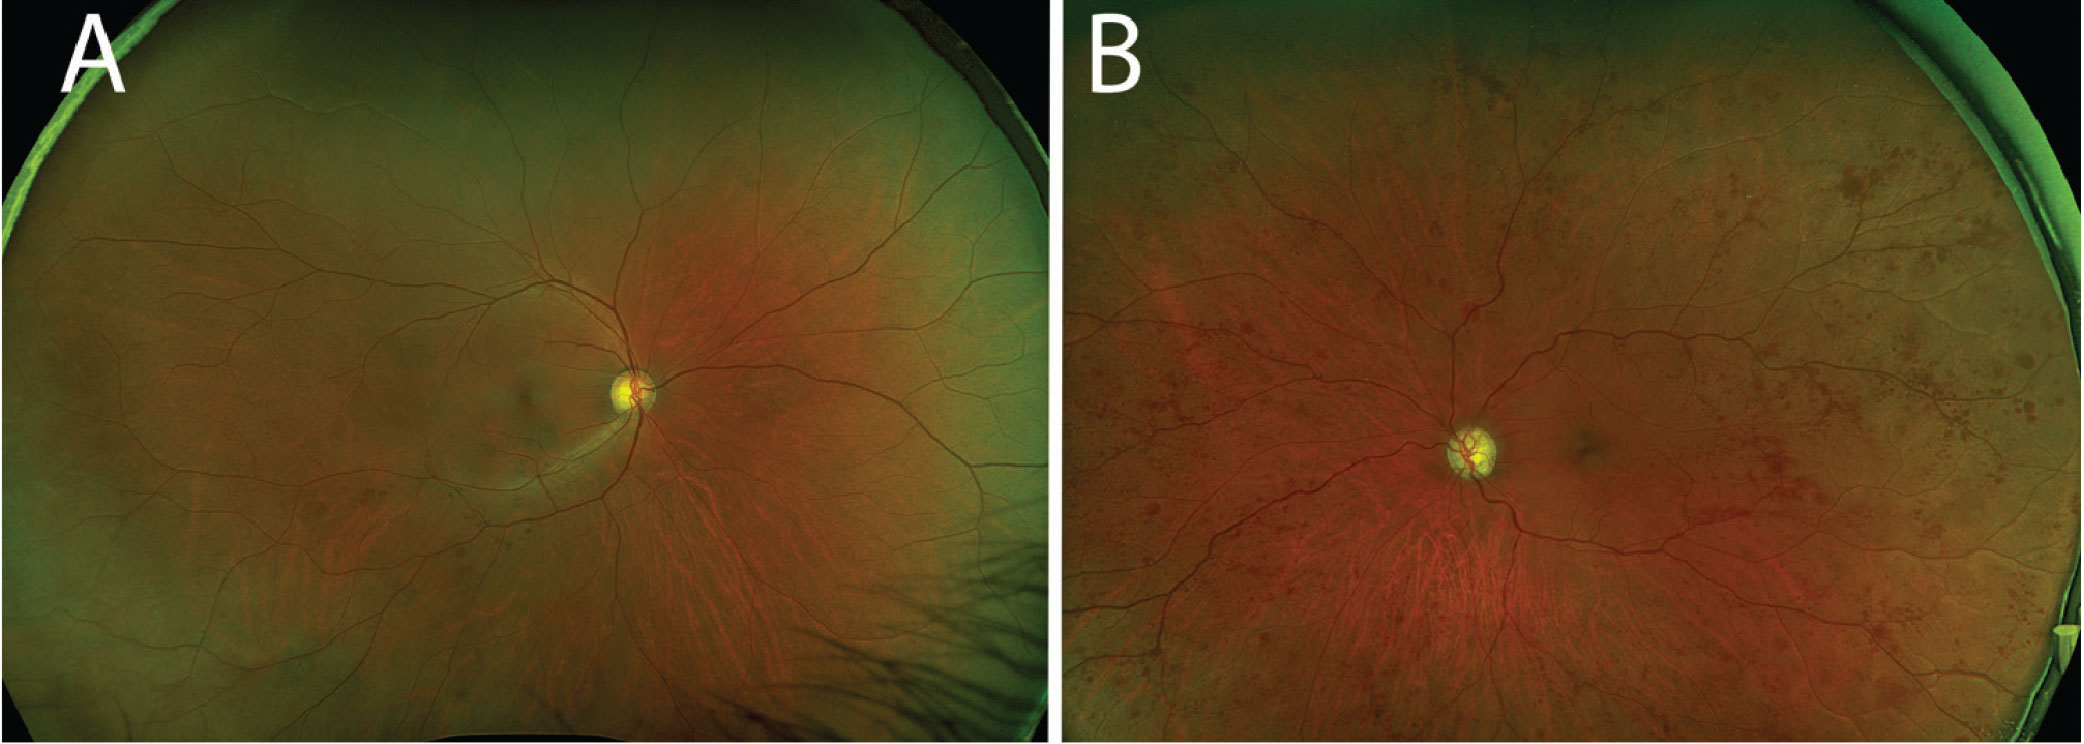 (A) The right fundus was largely unremarkable. (B) In the left fundus, one can appreciate the extensive blot hemorrhages in the midperiphery and periphery. Note the attenuated arteries and dilated veins.